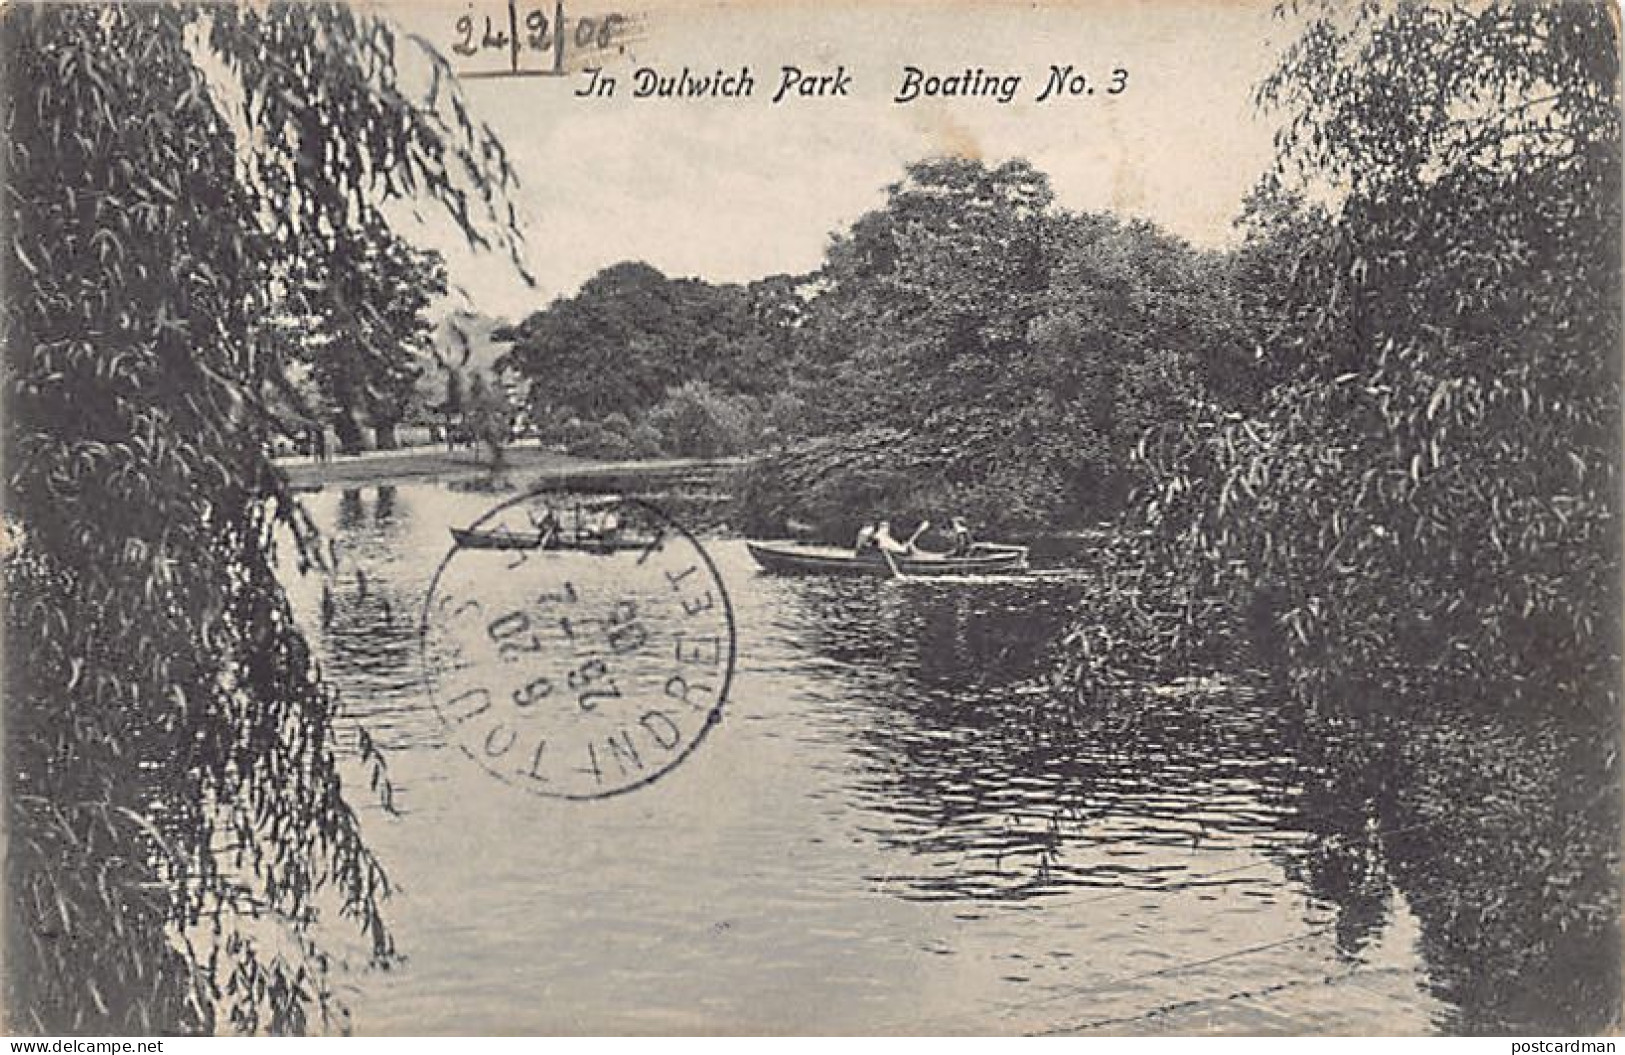 England - DULWICH London - In Dulwich Park - Boating No. 3 - London Suburbs